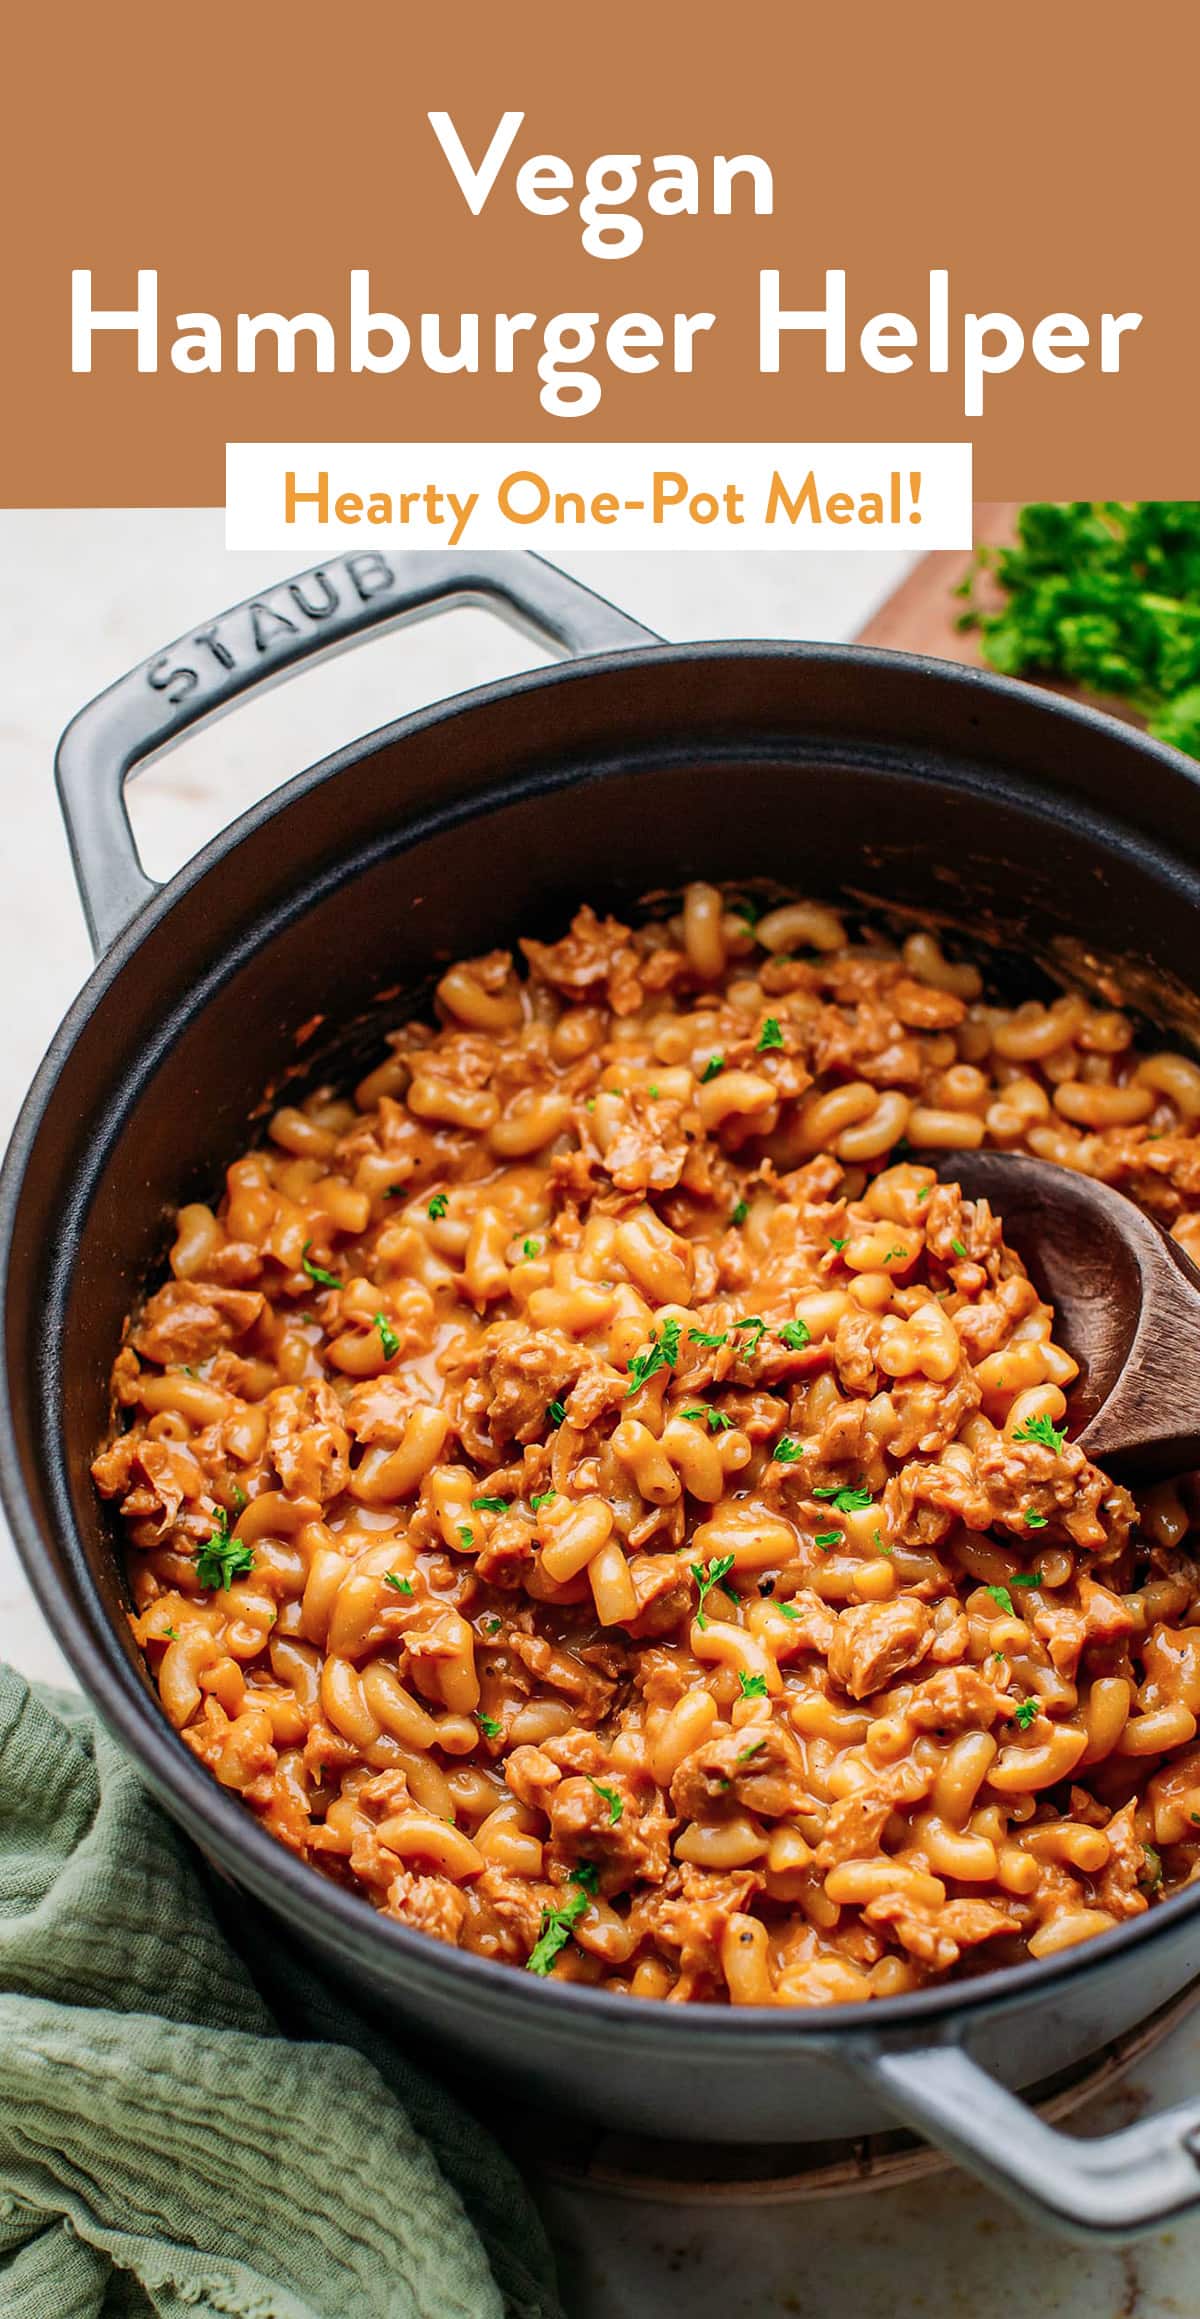 This family-friendly vegan hamburger helper is saucy, creamy, and savory. Made with meaty chunks of soy curls, macaroni, and a variety of seasonings, this one-pot meal is hearty, comforting, and packs bold flavors. Plus, it's easy to make and perfect for busy weeknights! #hamburgerhelper #vegan #onepot